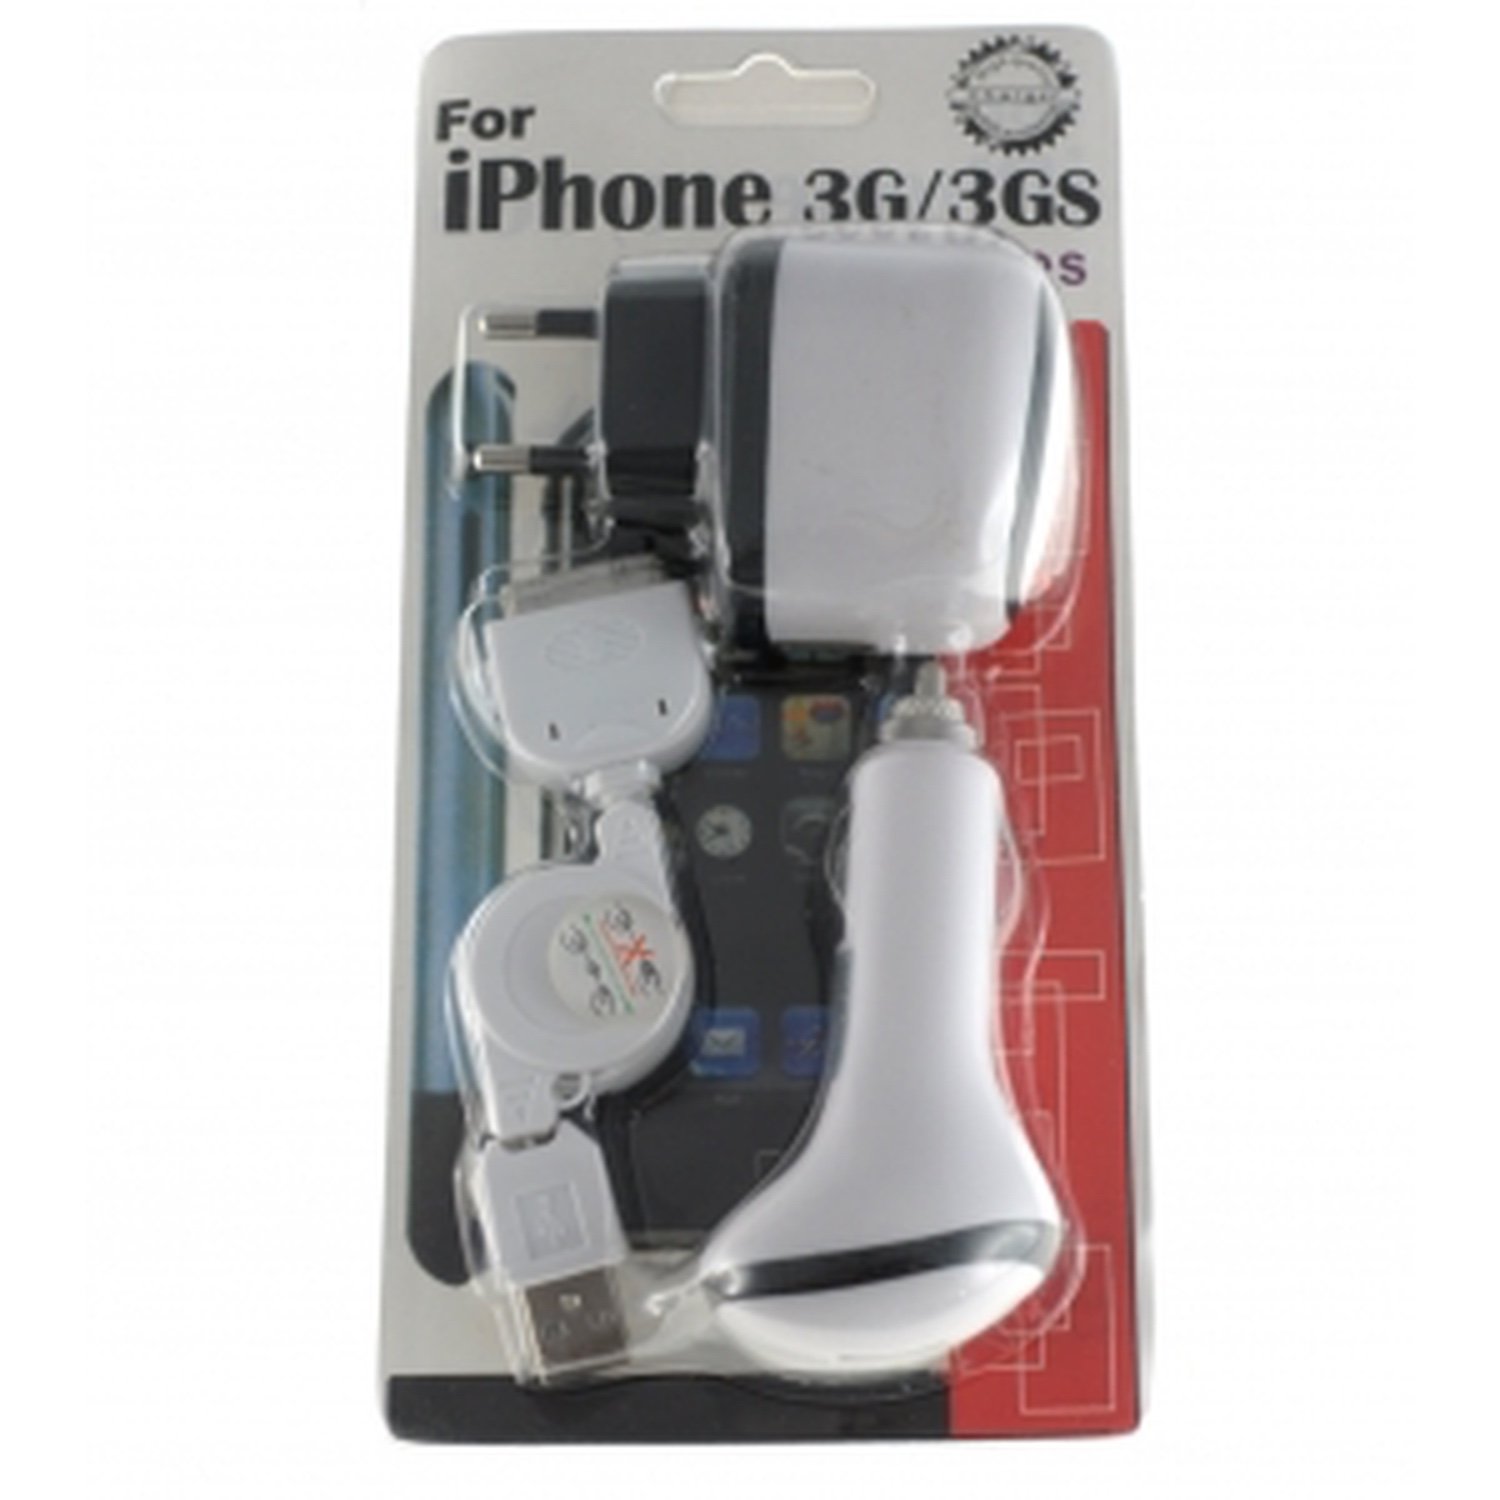 Pack 3 In 1 Opladers Voor Apple Ipod/Itouch/Iphone/3G [Charger Netwerk + Auto charger + Usb Cord]